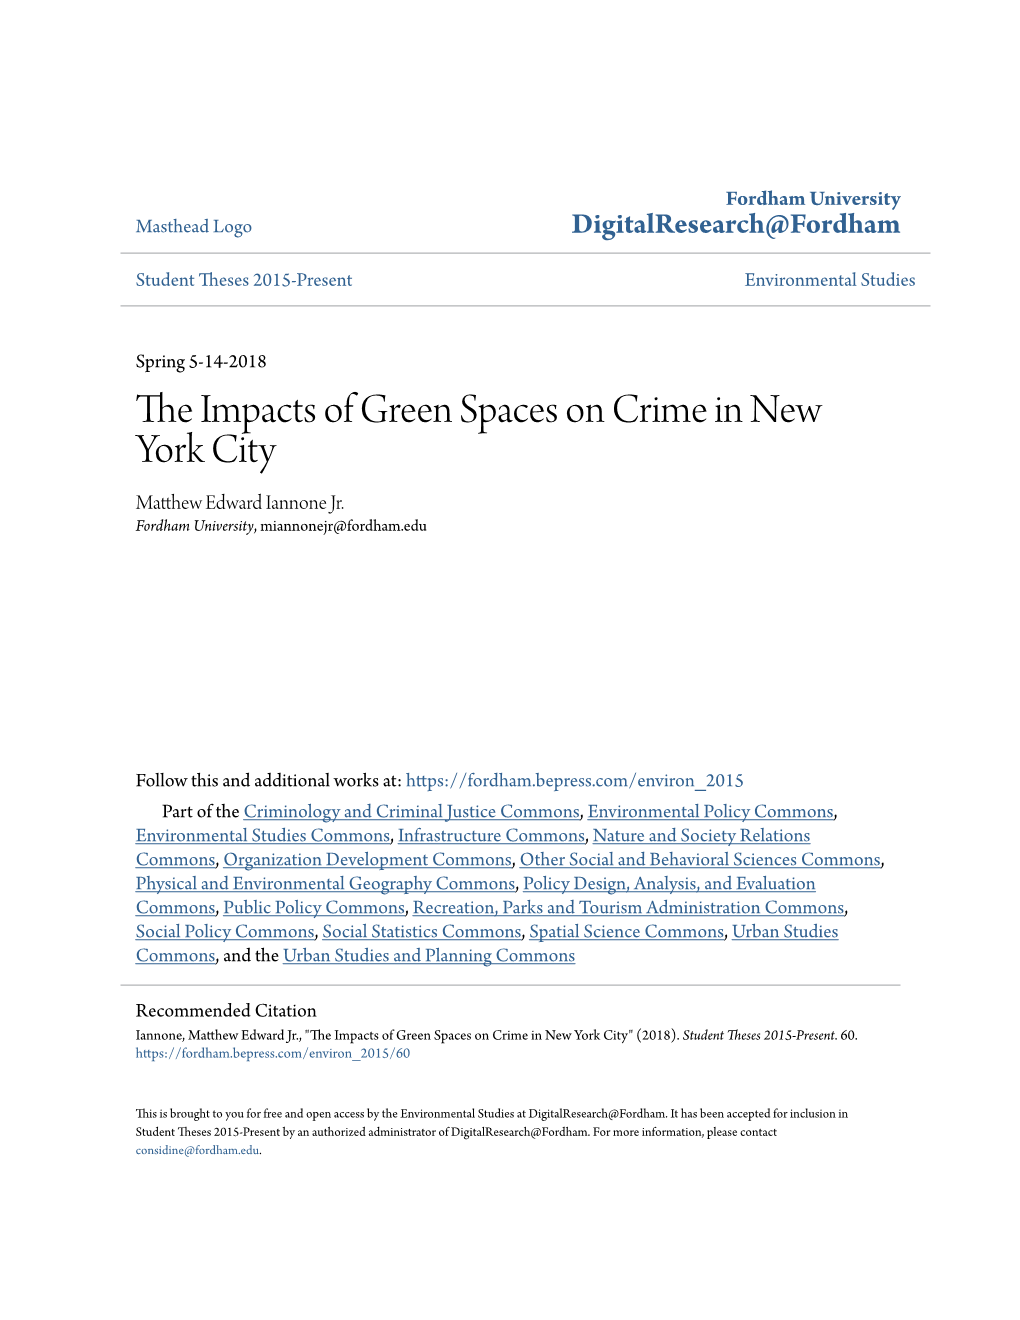 The Impacts of Green Spaces on Crime in New York City Matthew Iannone Environmental Studies and Urban Studies Senior Thesis